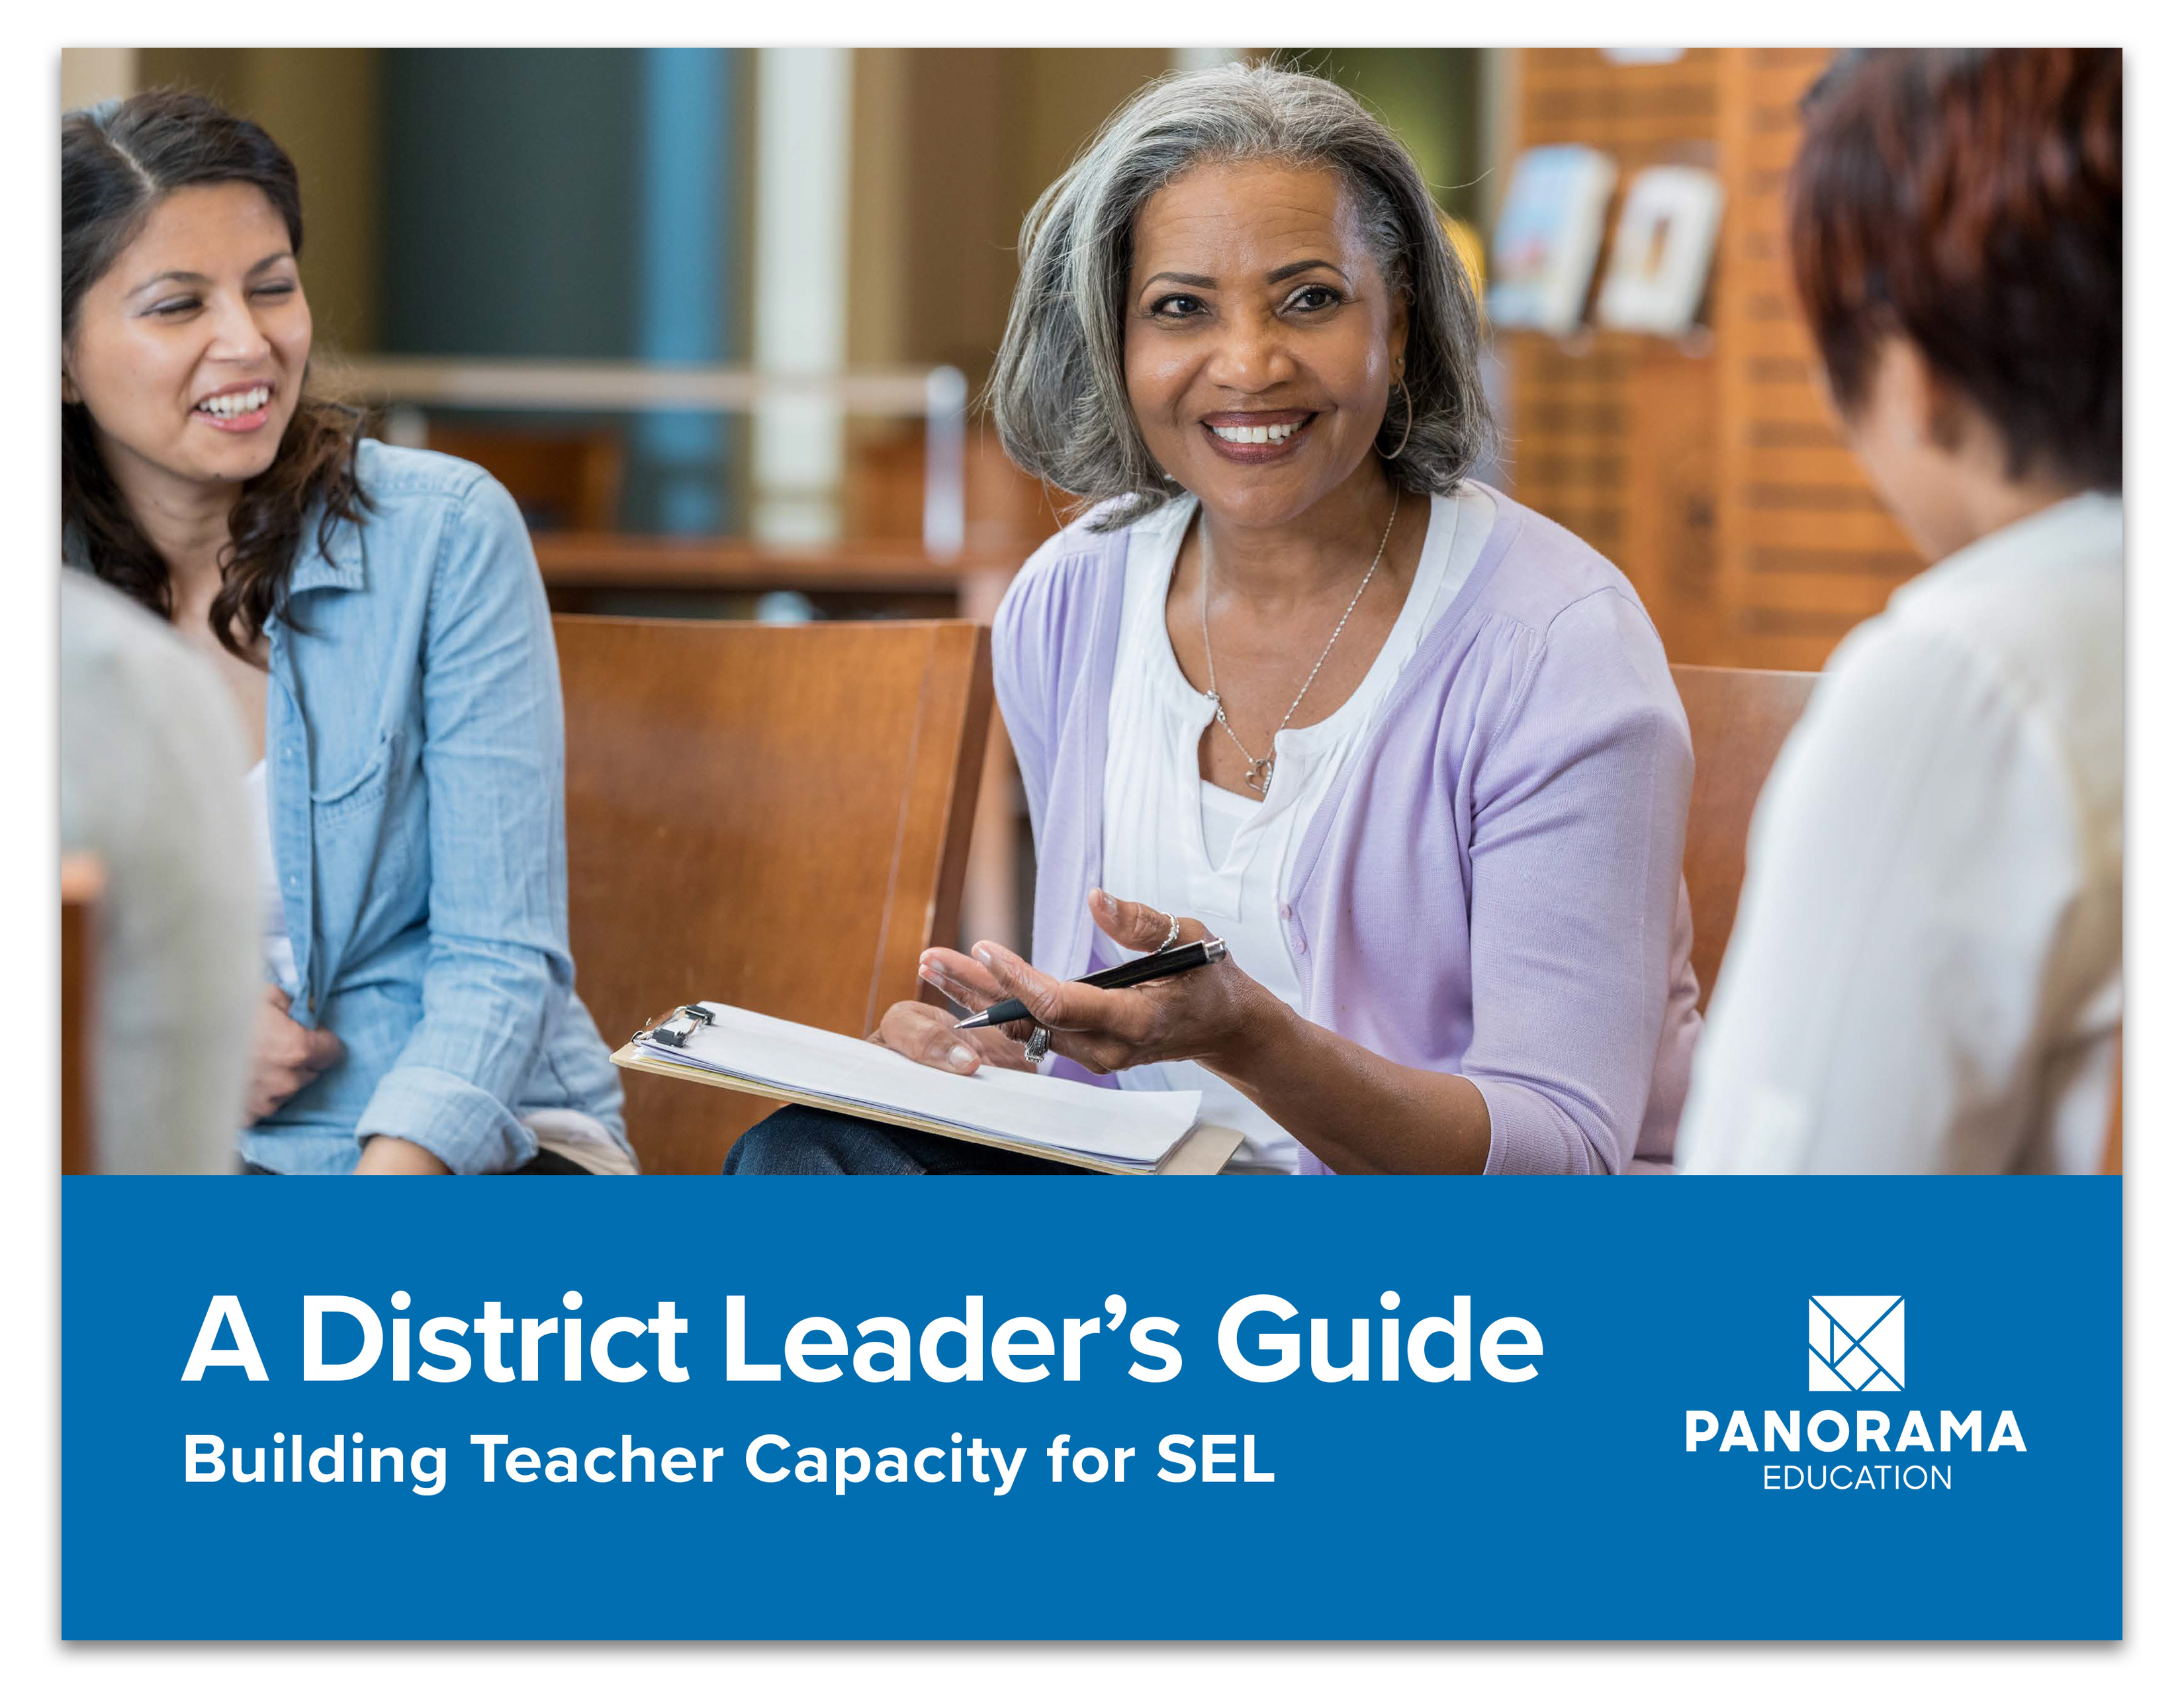 thumb Re Brand A District Leader’s Guide to Building Teacher Capacity for SEL (dragged)